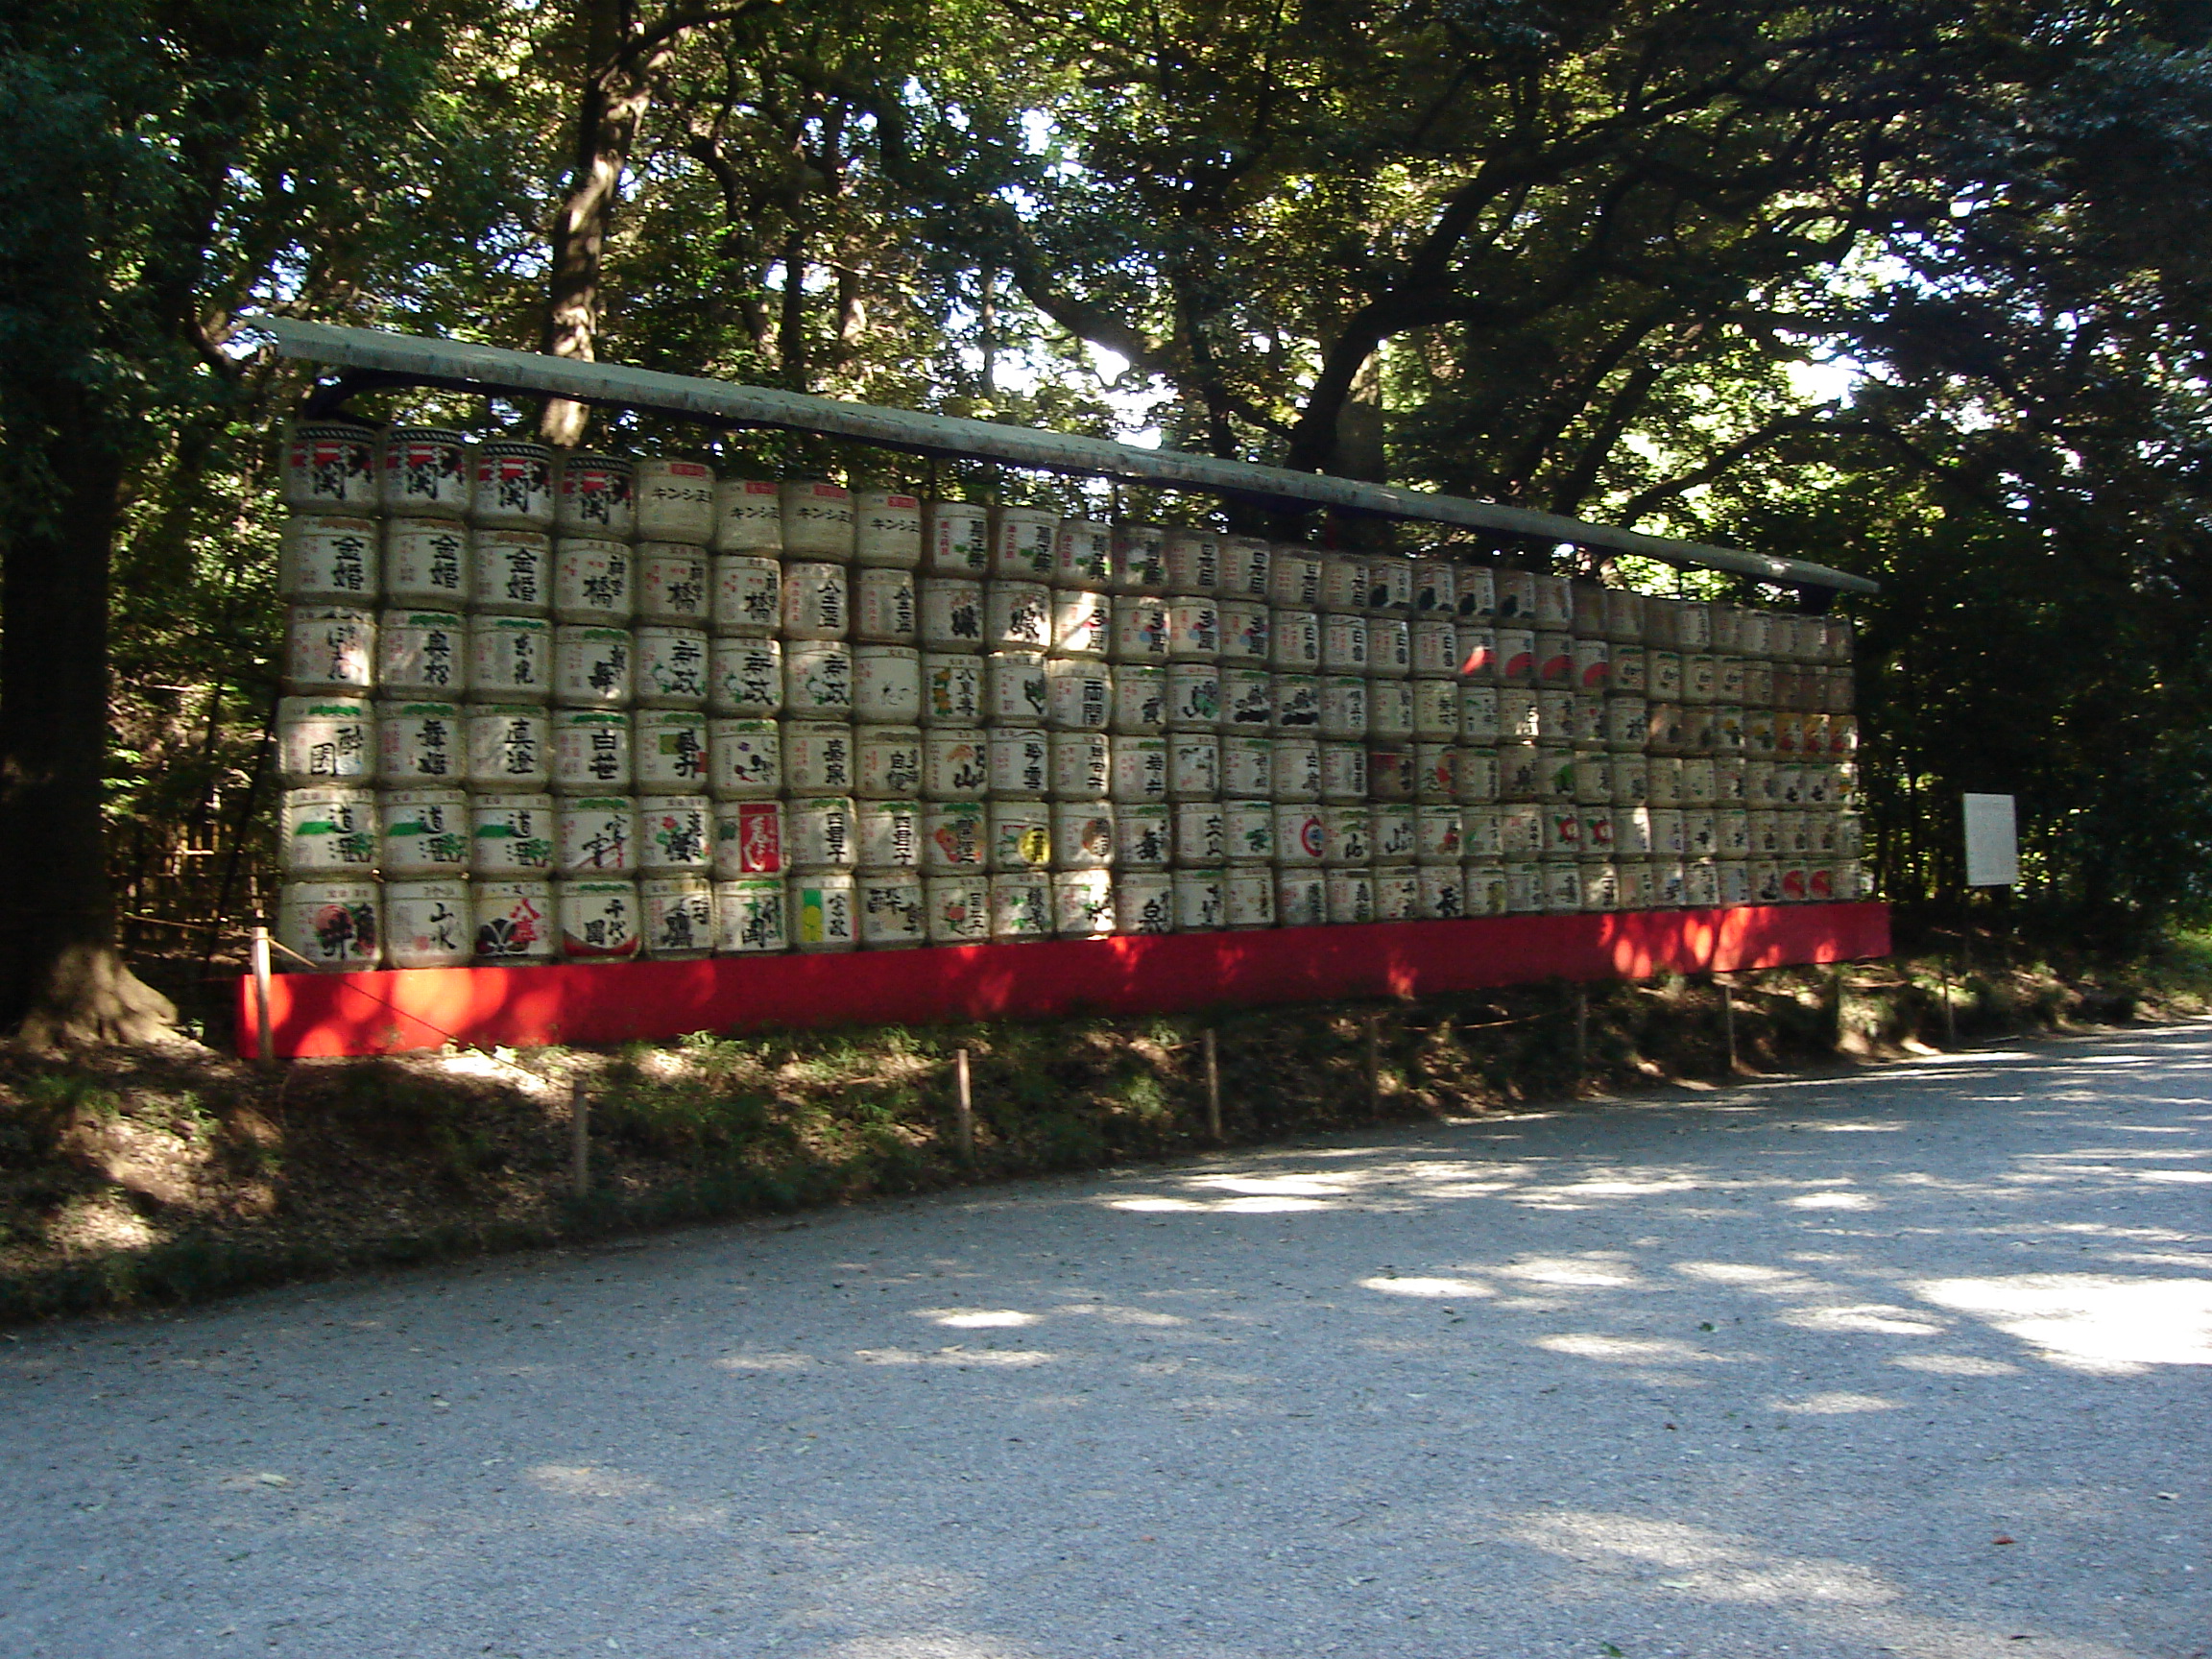 a display of barrels of donated sake with many colourful characters and symbols